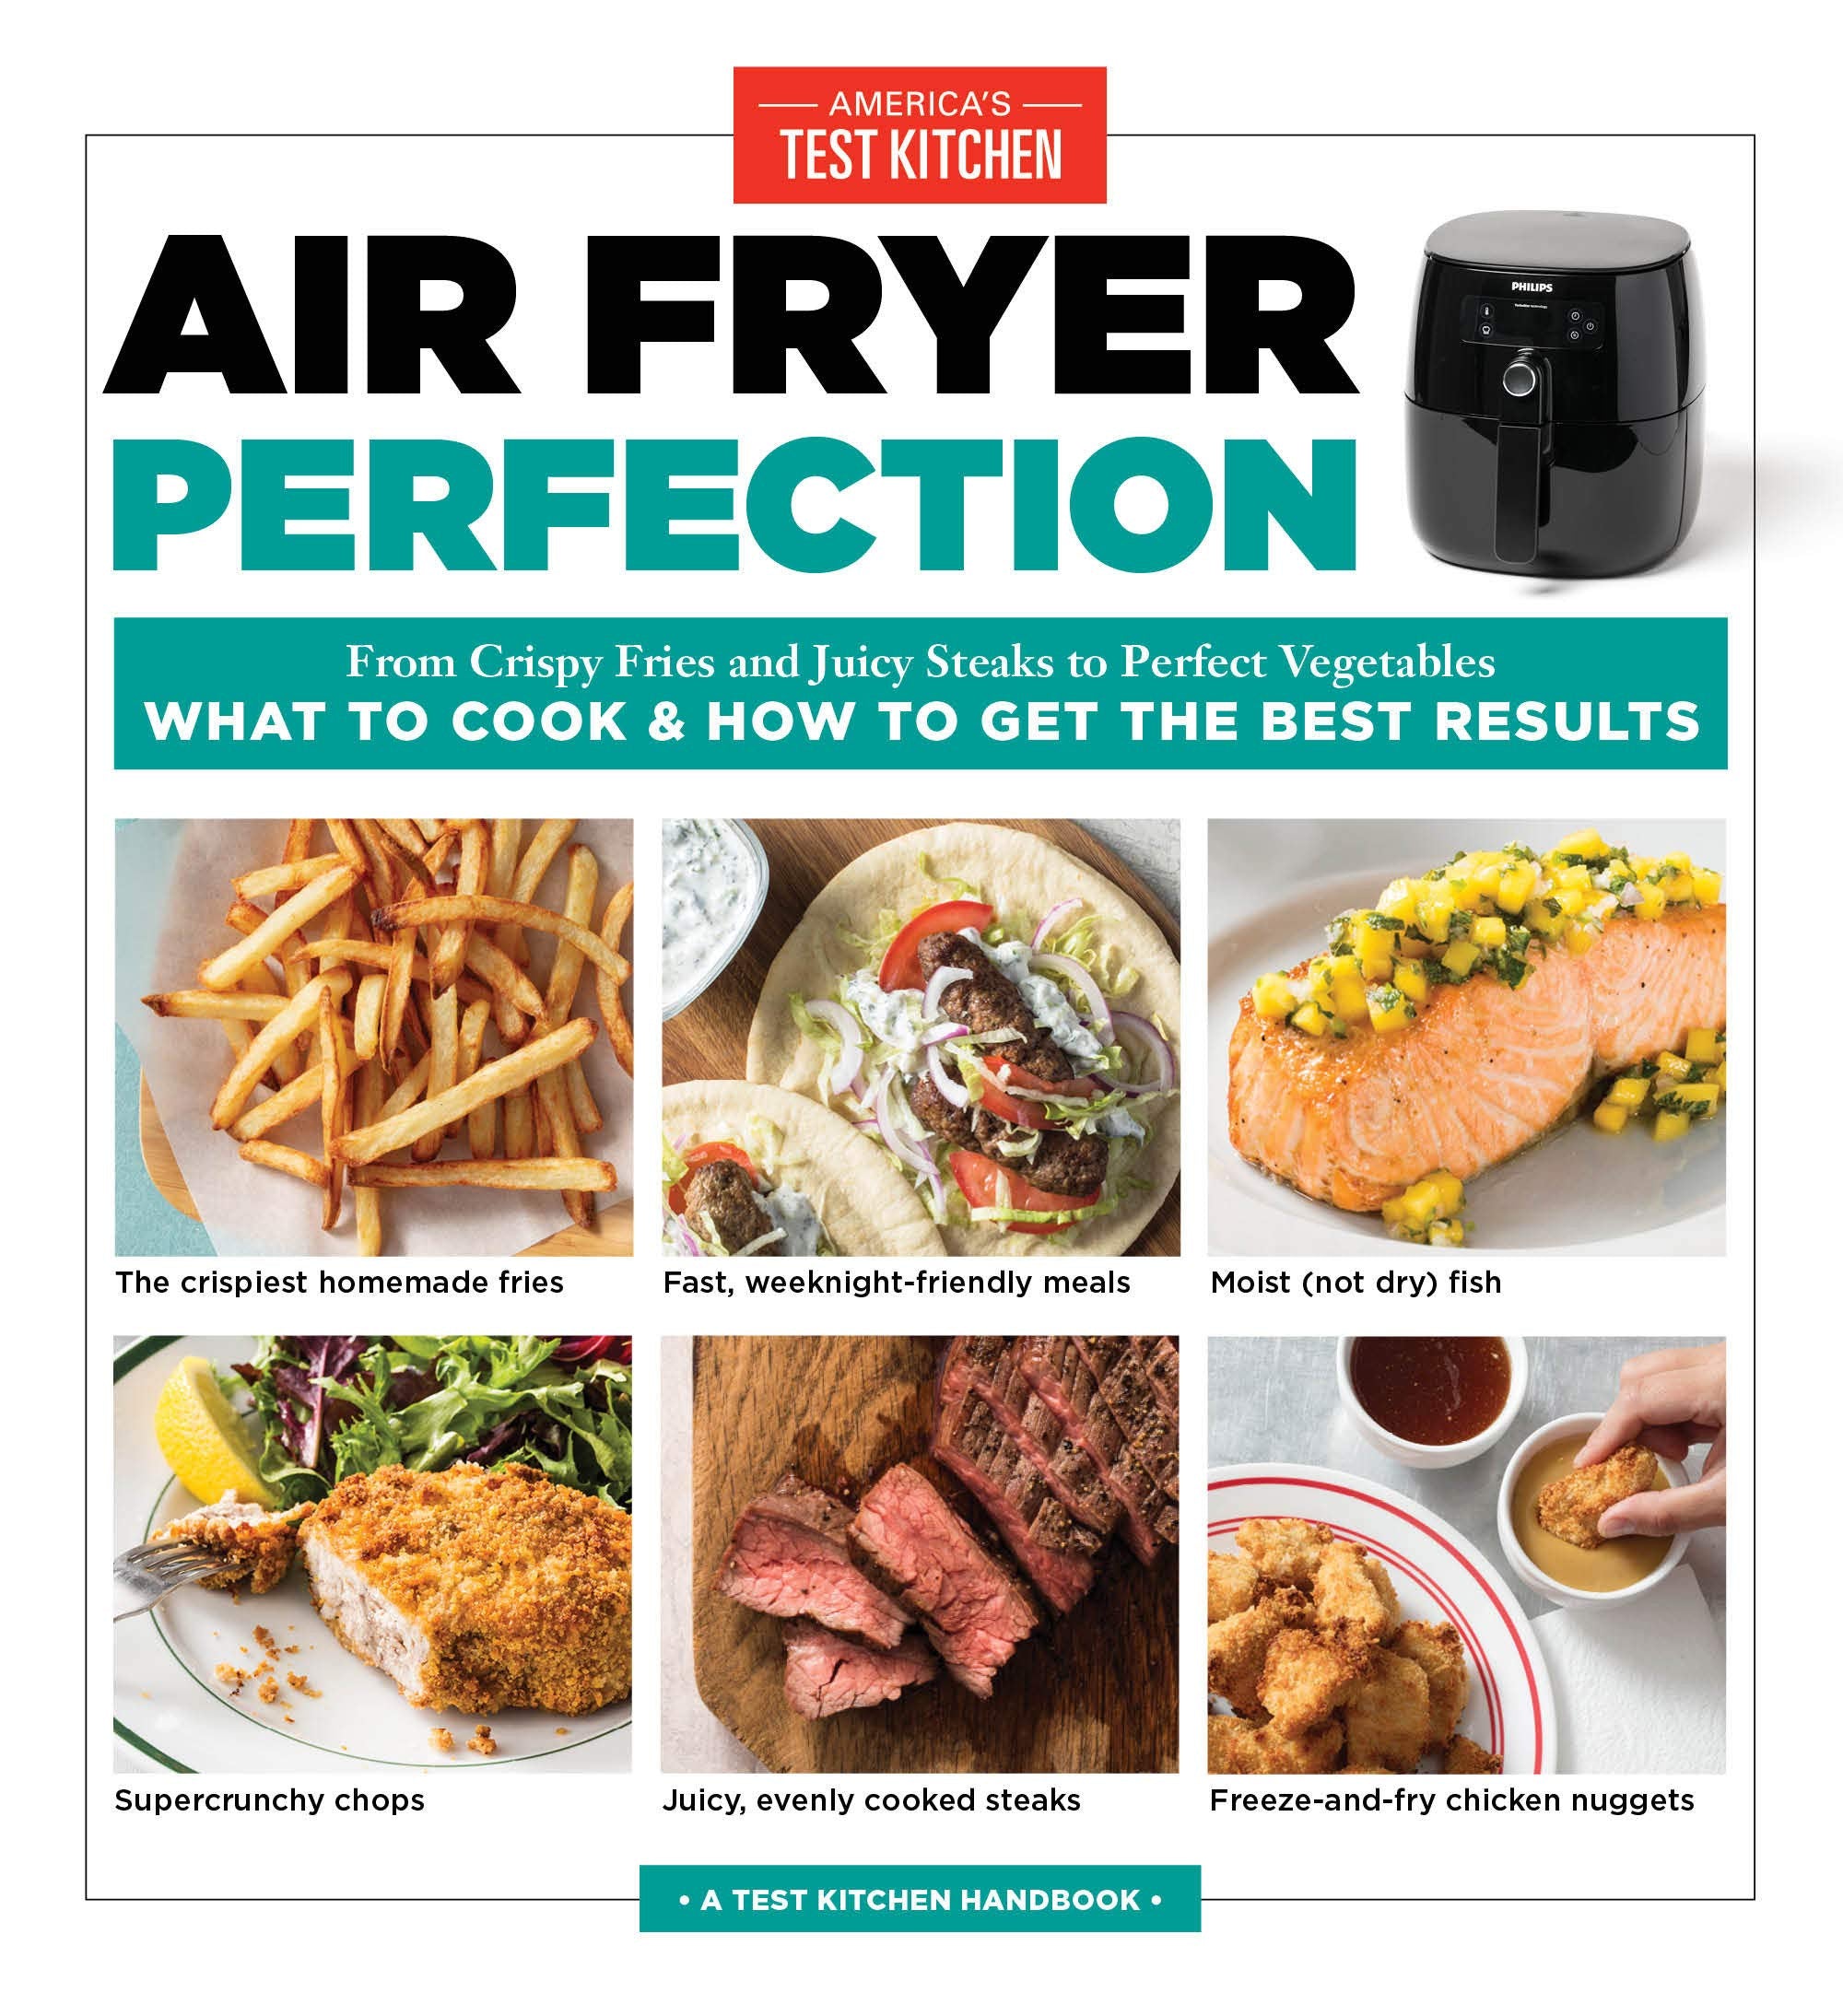 Air Fryer Perfection: From Crispy Fries and Juicy Steaks to Perfect Vegetables, What to Cook & How to Get the Best Results (America's Test Kitchen)